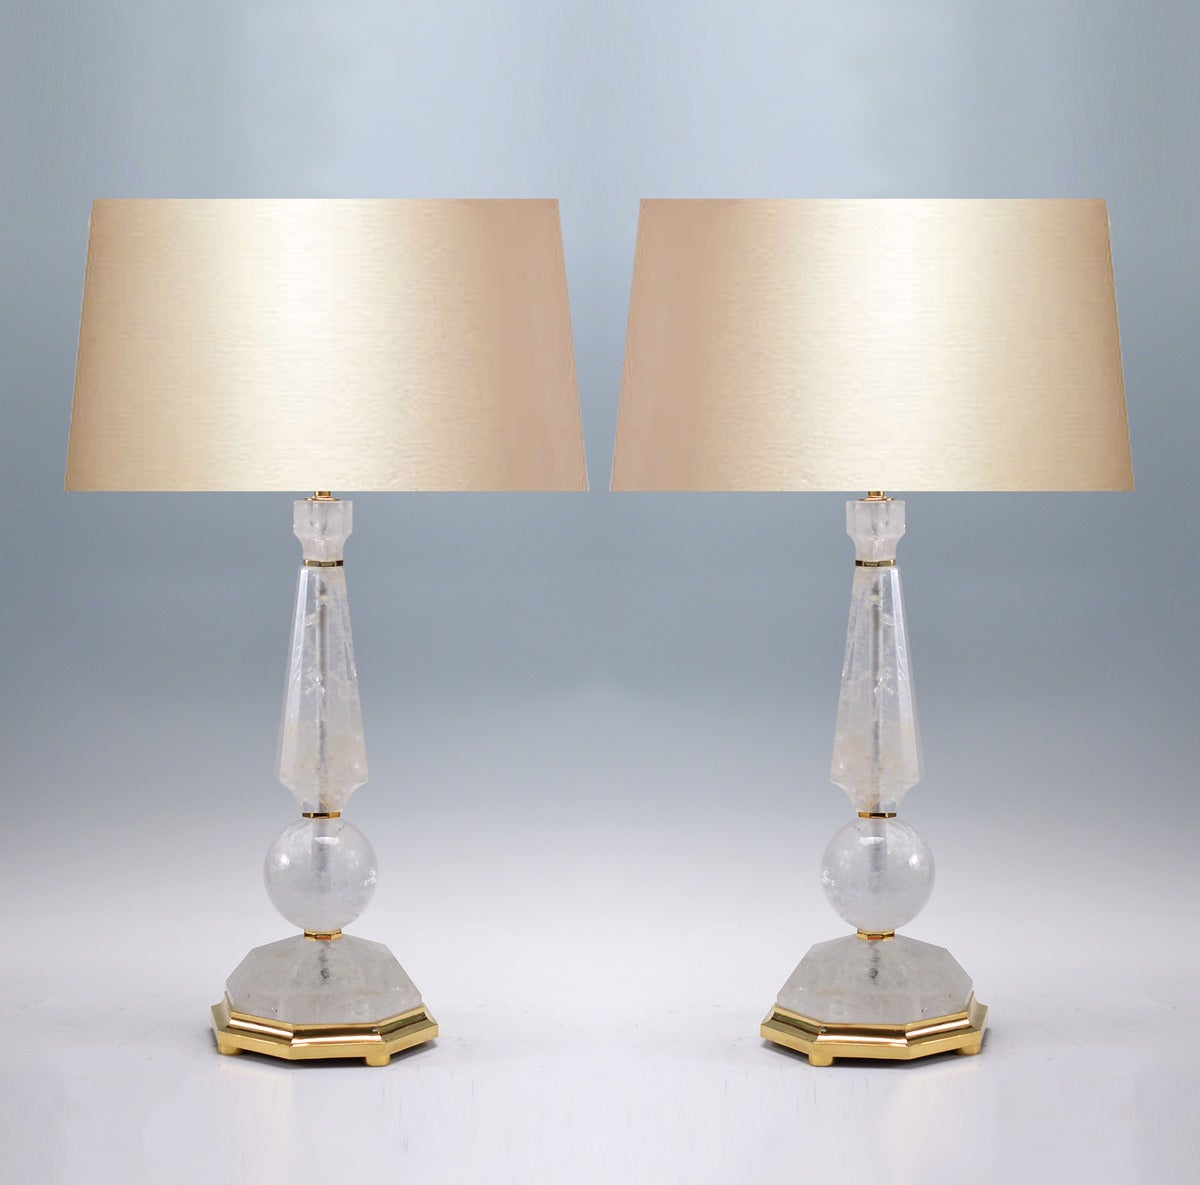 Pair of fine carved prism and globe form rock crystal quartz lamps with polish brass base, created by Phoenix Gallery, NYC.
Available in nickel plating and antique brass finished.
Measure: To the rock crystal: 21.5